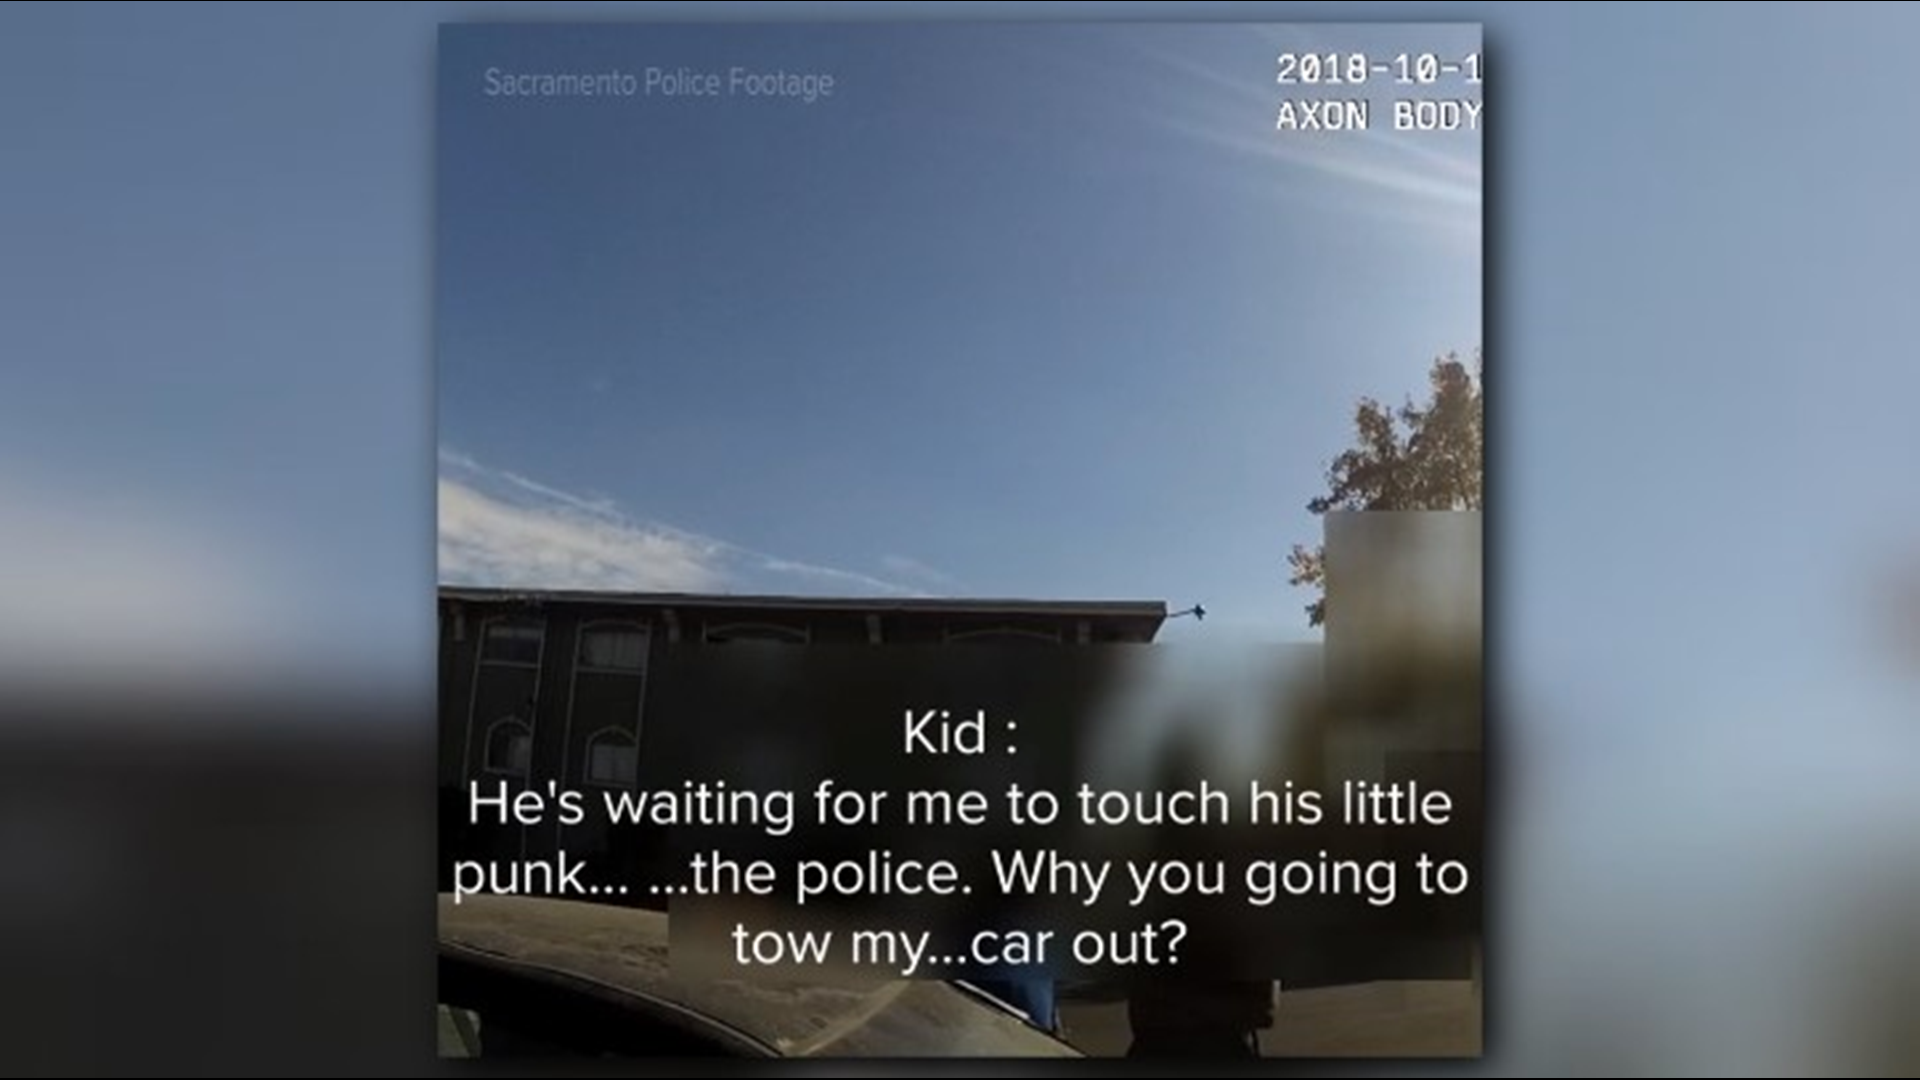 Newly released body cam video shows kids cursing and harassing officers waiting for a tow truck to come remove a vehicle. The video may be disturbing to some, but it's just one example of how quickly things can escalate during a traffic stop.